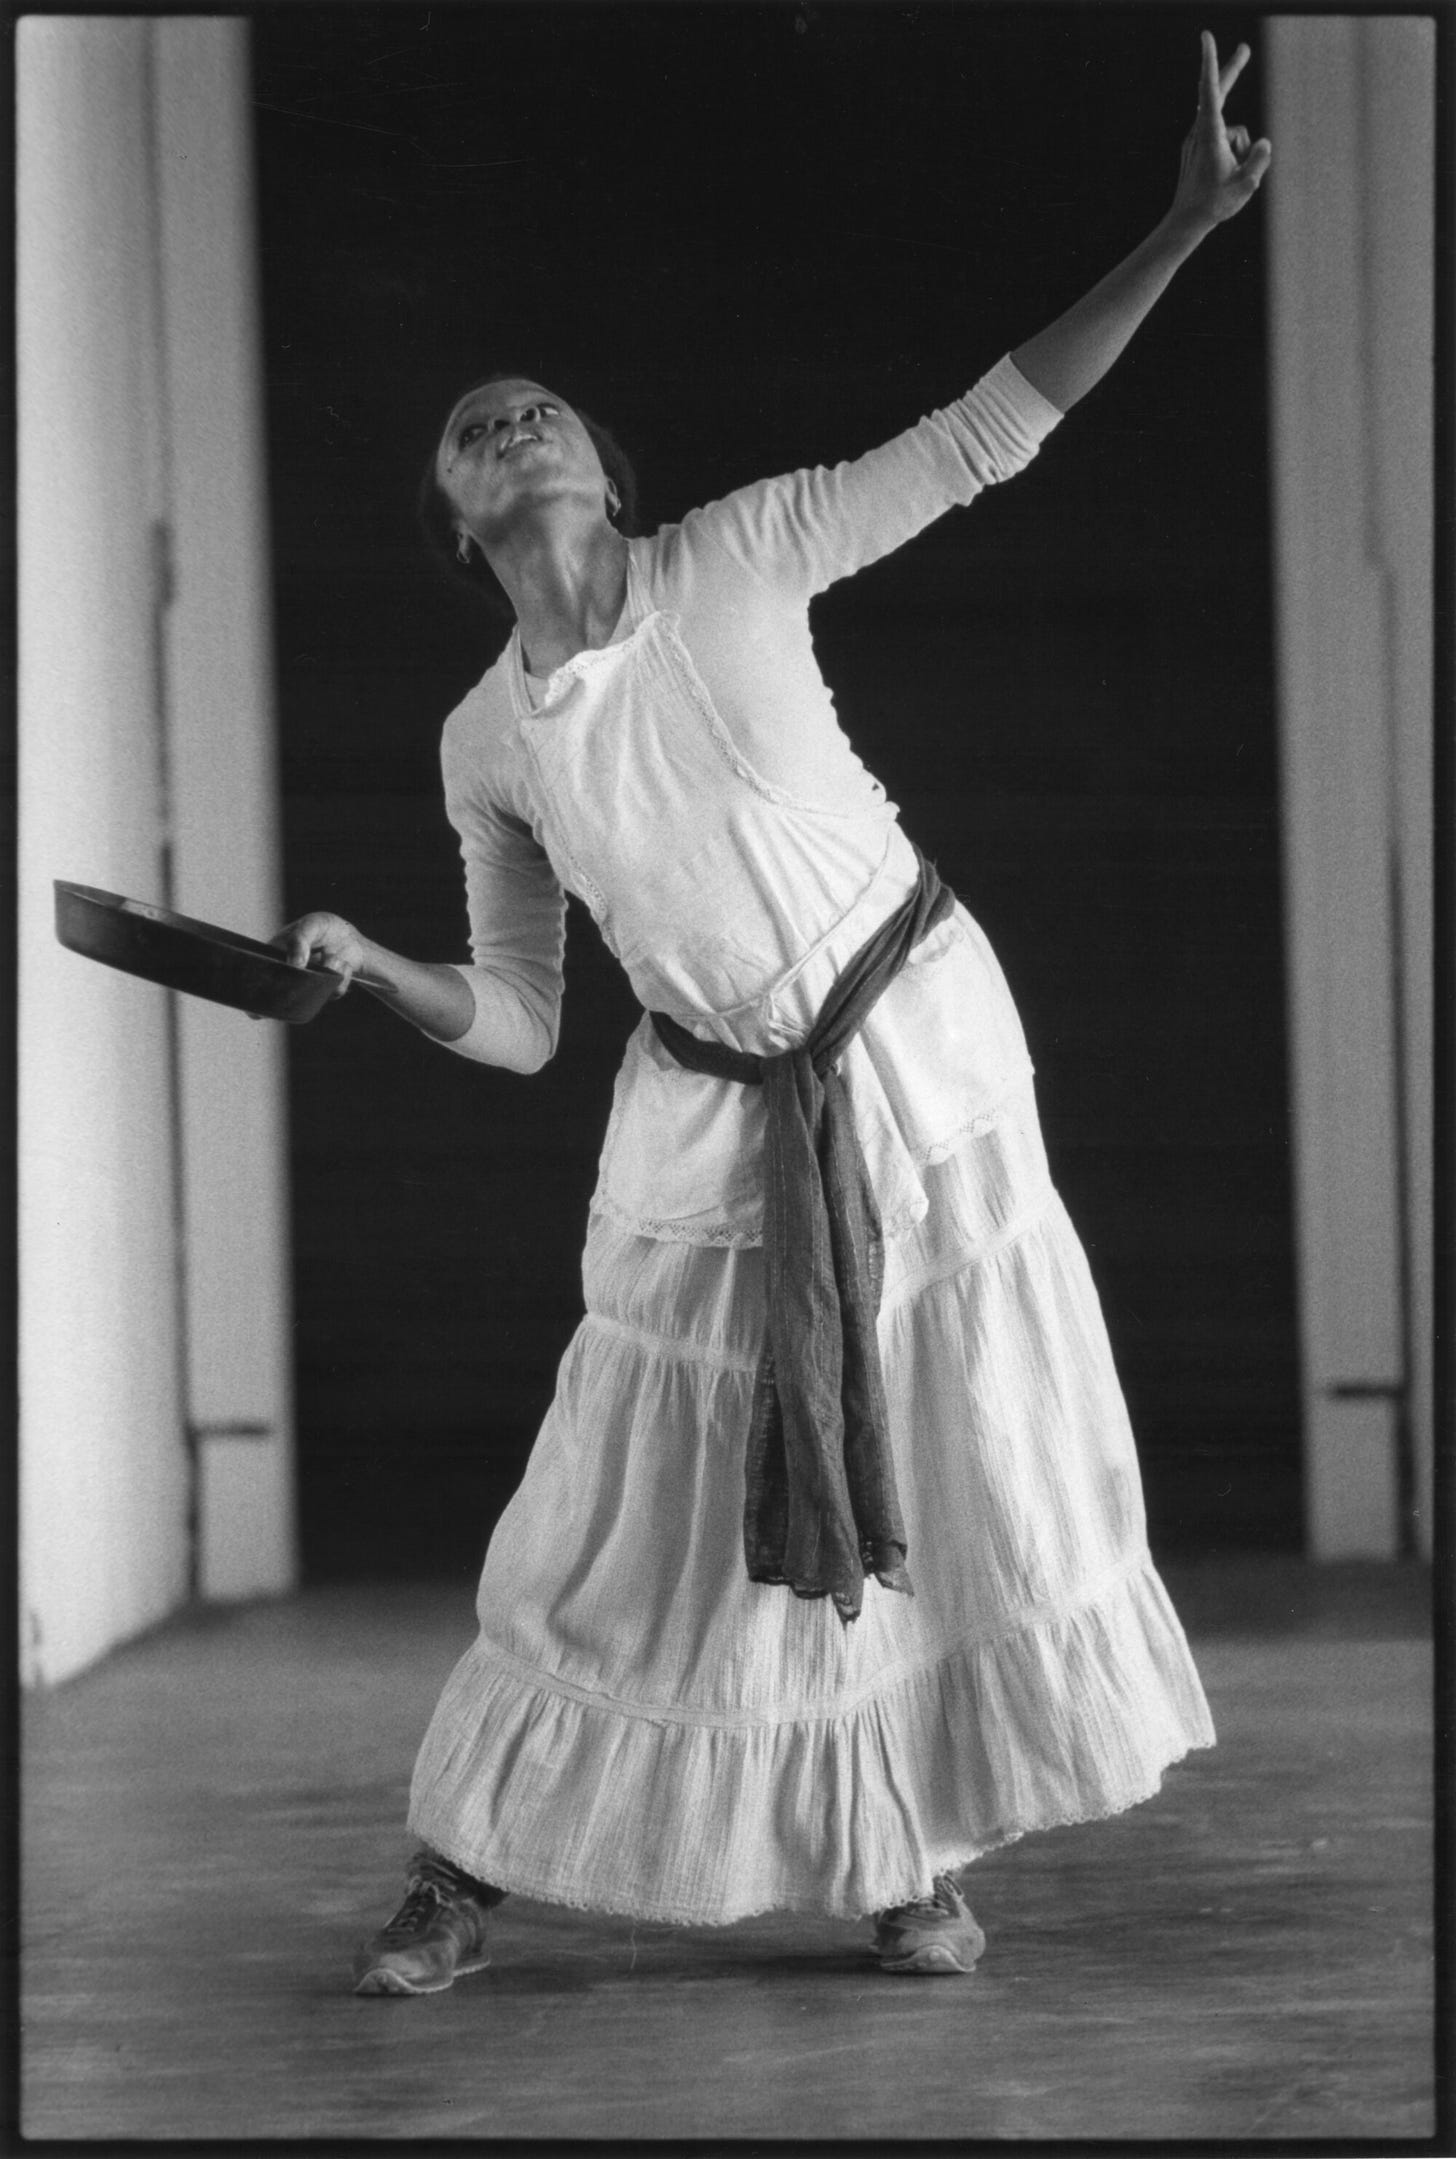 Blondell Cummings dances on stage wearing a white dress and holding a cast iron frying pan